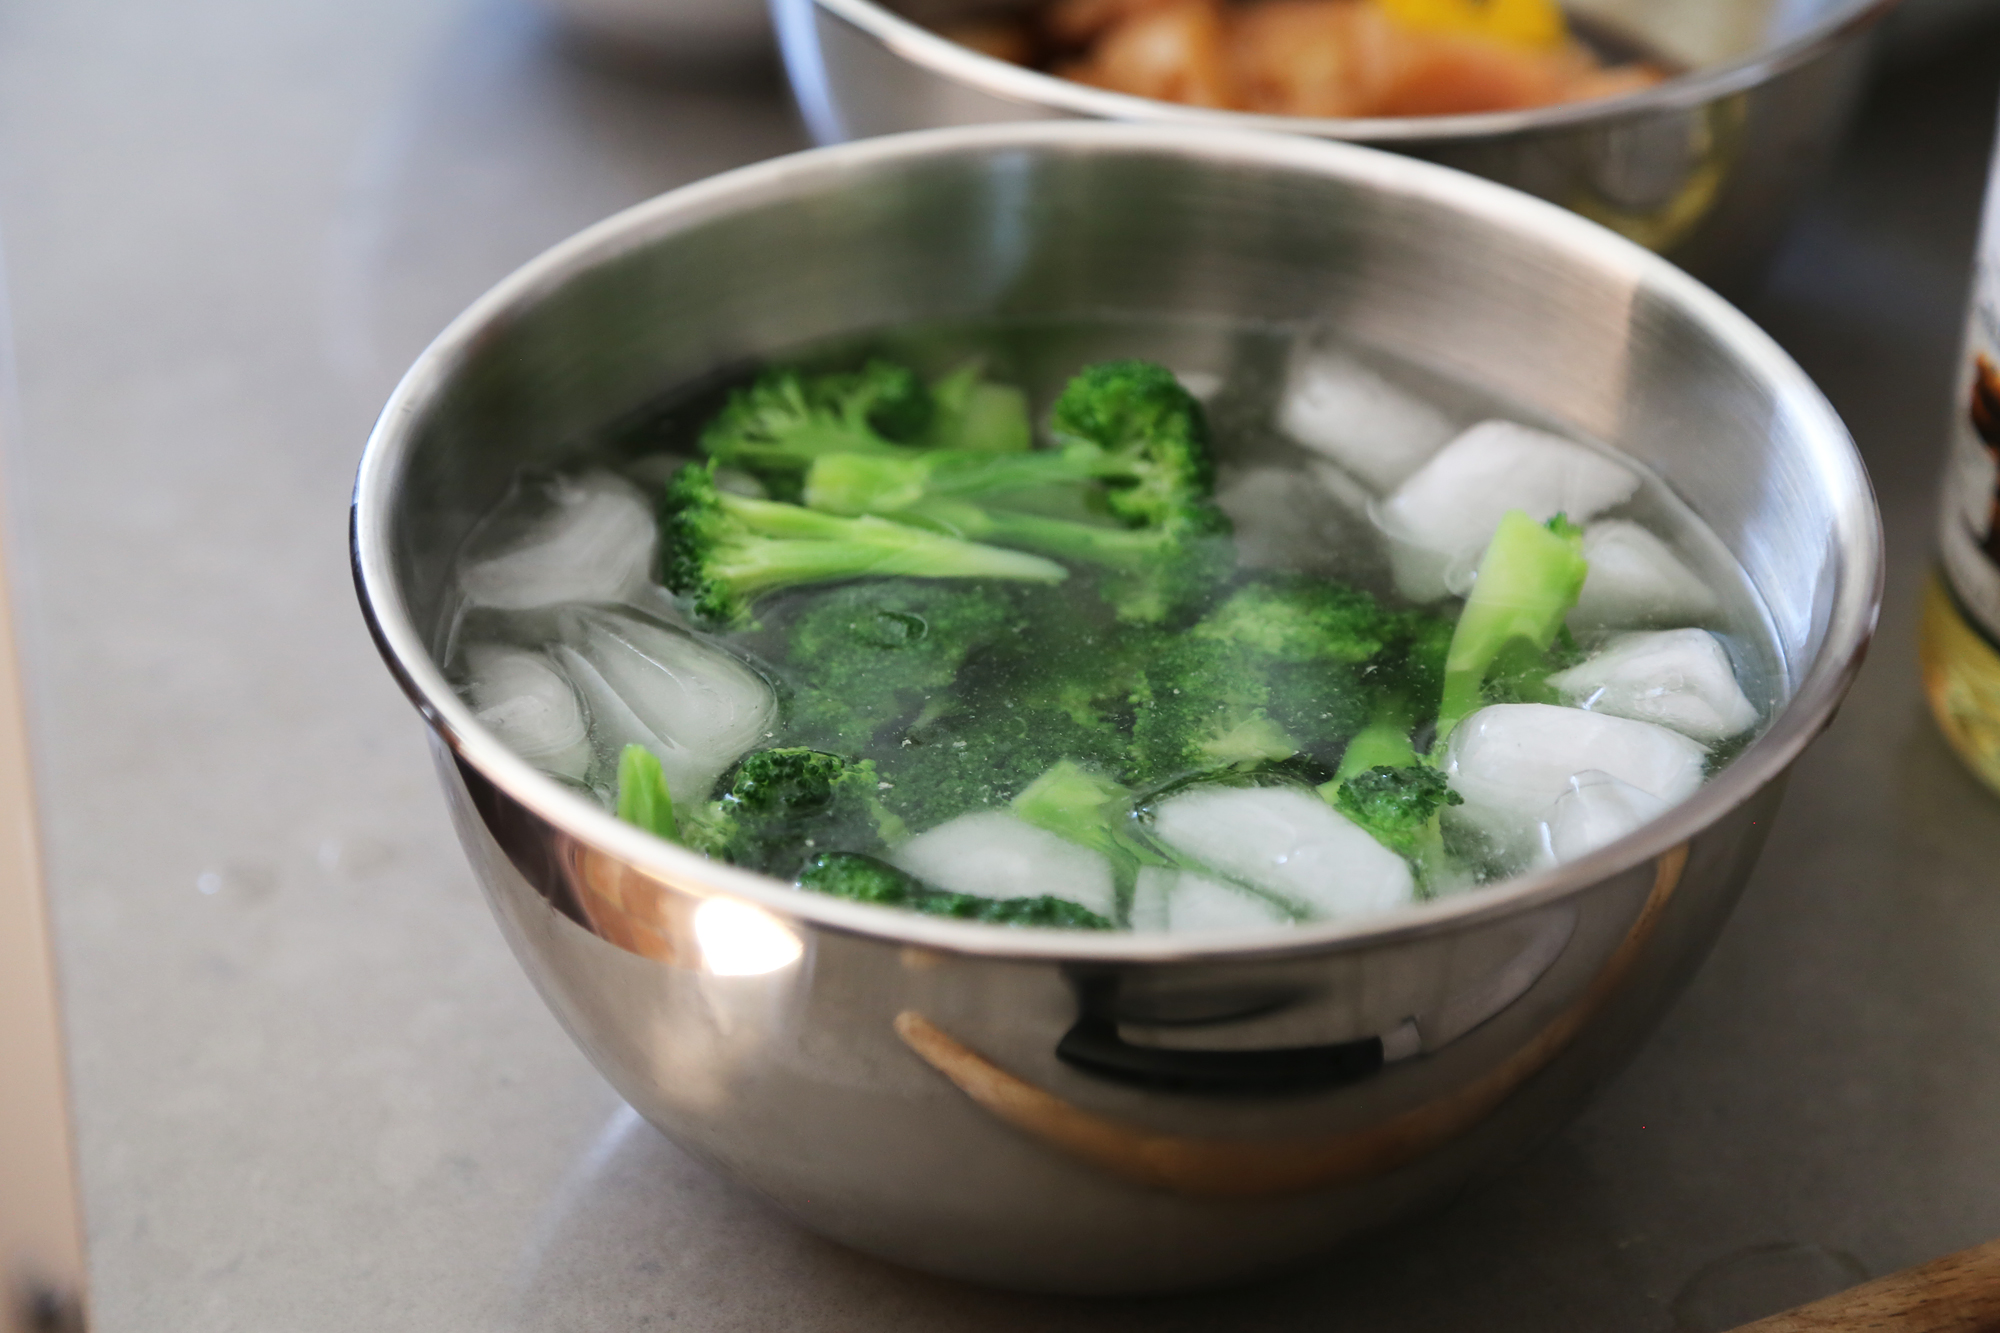 Plunge broccoli in a bowl of ice water to stop the cooking quickly.